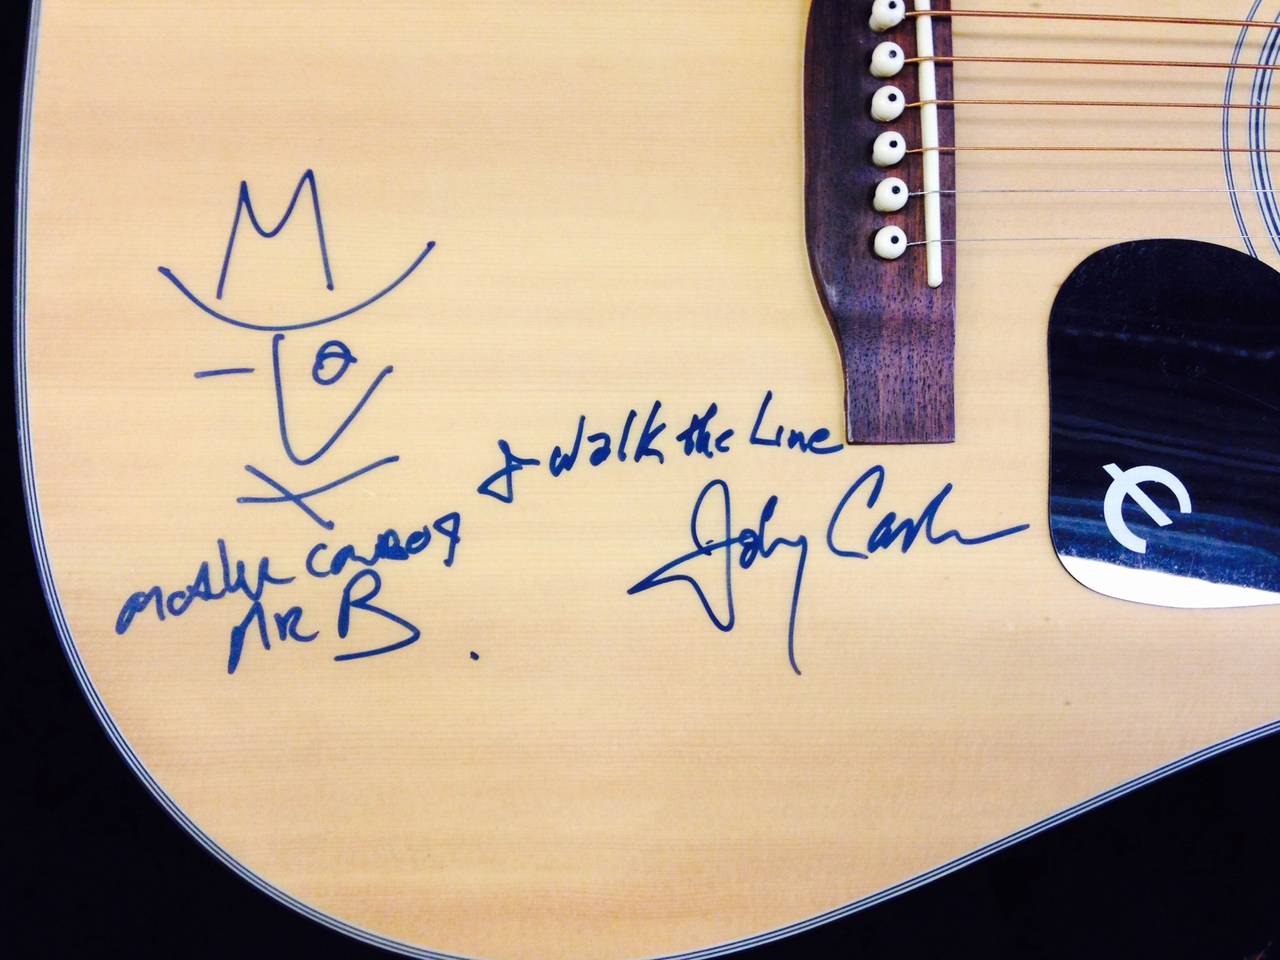 This is a Gibson Epiphone guitar circa 1992 signed in 1994 by the great Johnny Cash, famous for the song, 